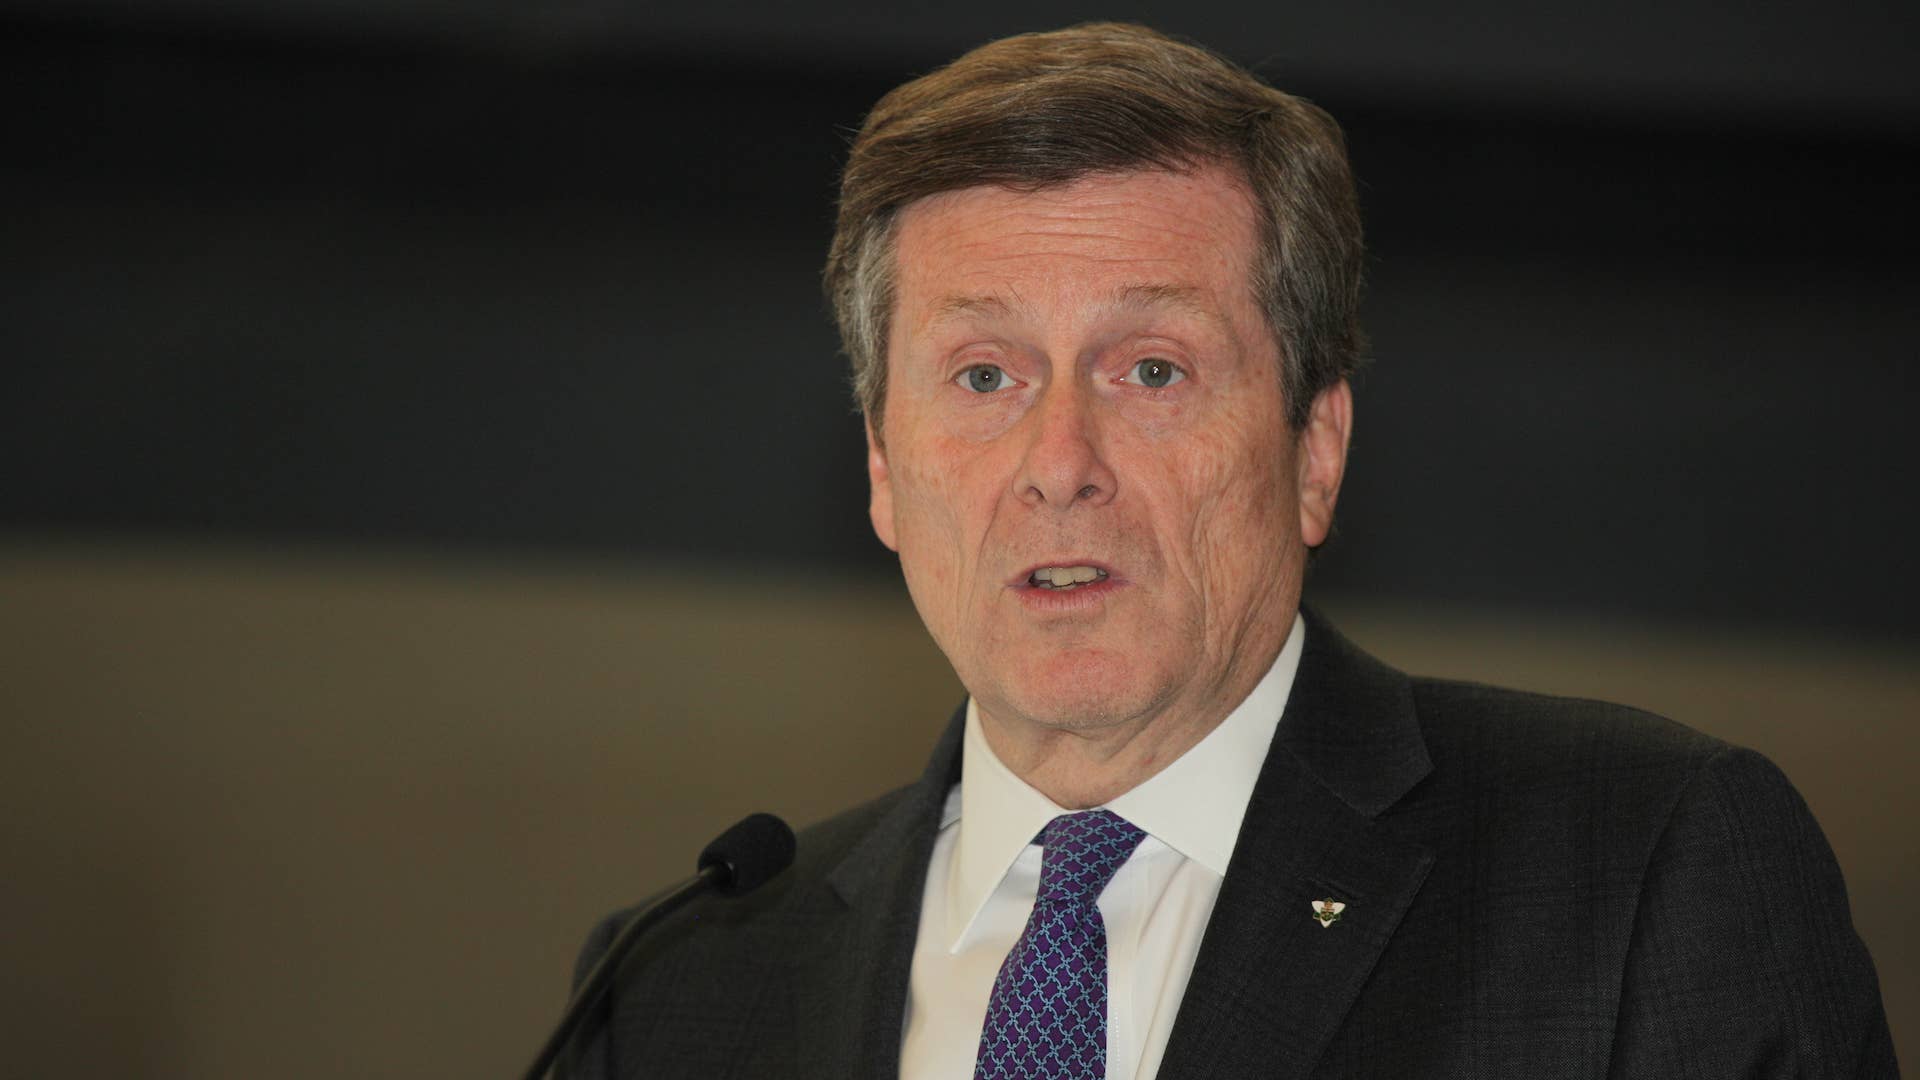 John Tory photographed at speaking engagement